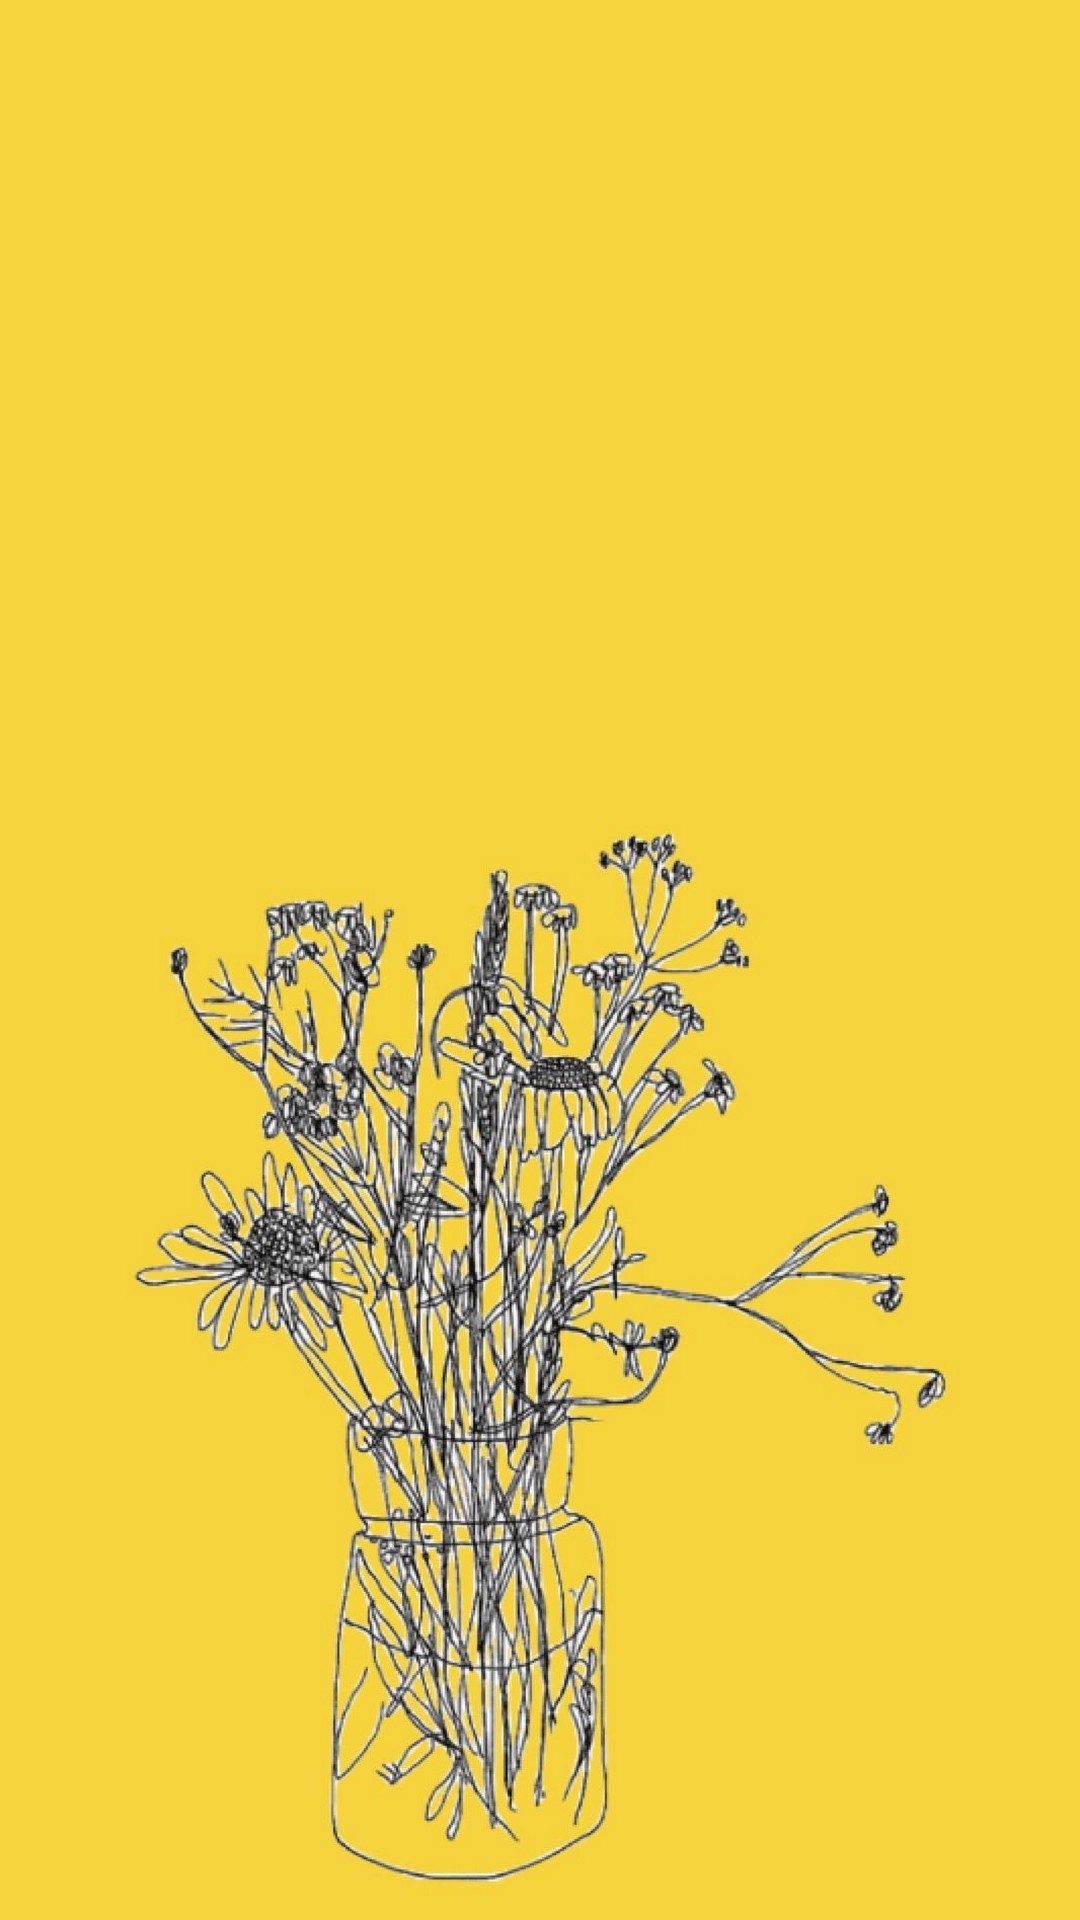 Yellow Aesthetic iPhone 8 Wallpaper with high-resolution 1080x1920 pixel. You can use this wallpaper for your iPhone 5, 6, 7, 8, X, XS, XR backgrounds, Mobile Screensaver, or iPad Lock Screen